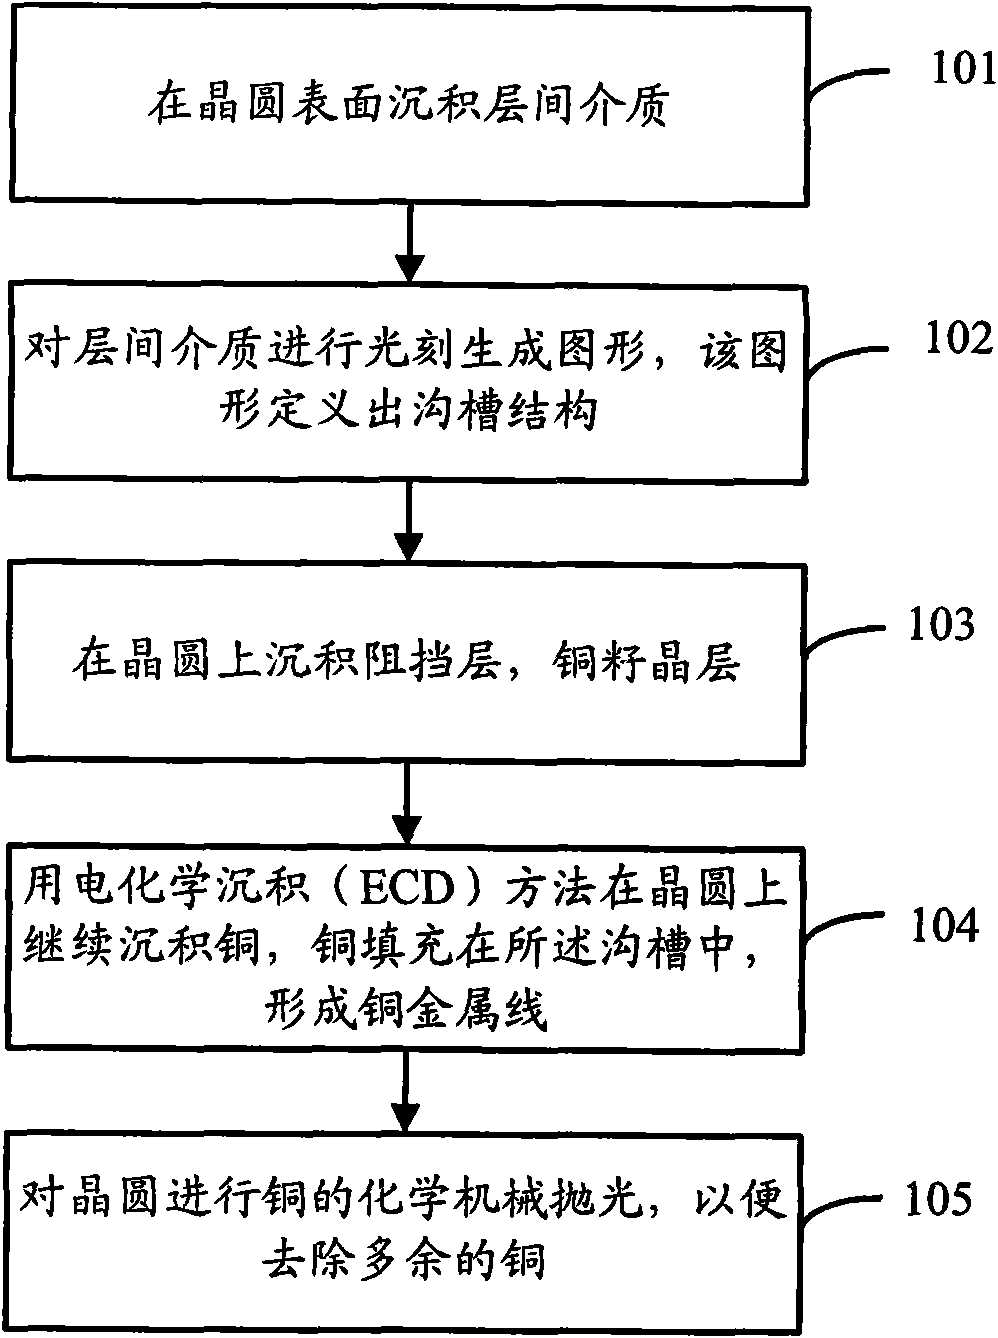 Method for constructing copper wire on wafer and chemical mechanical polishing (CMP) method for copper